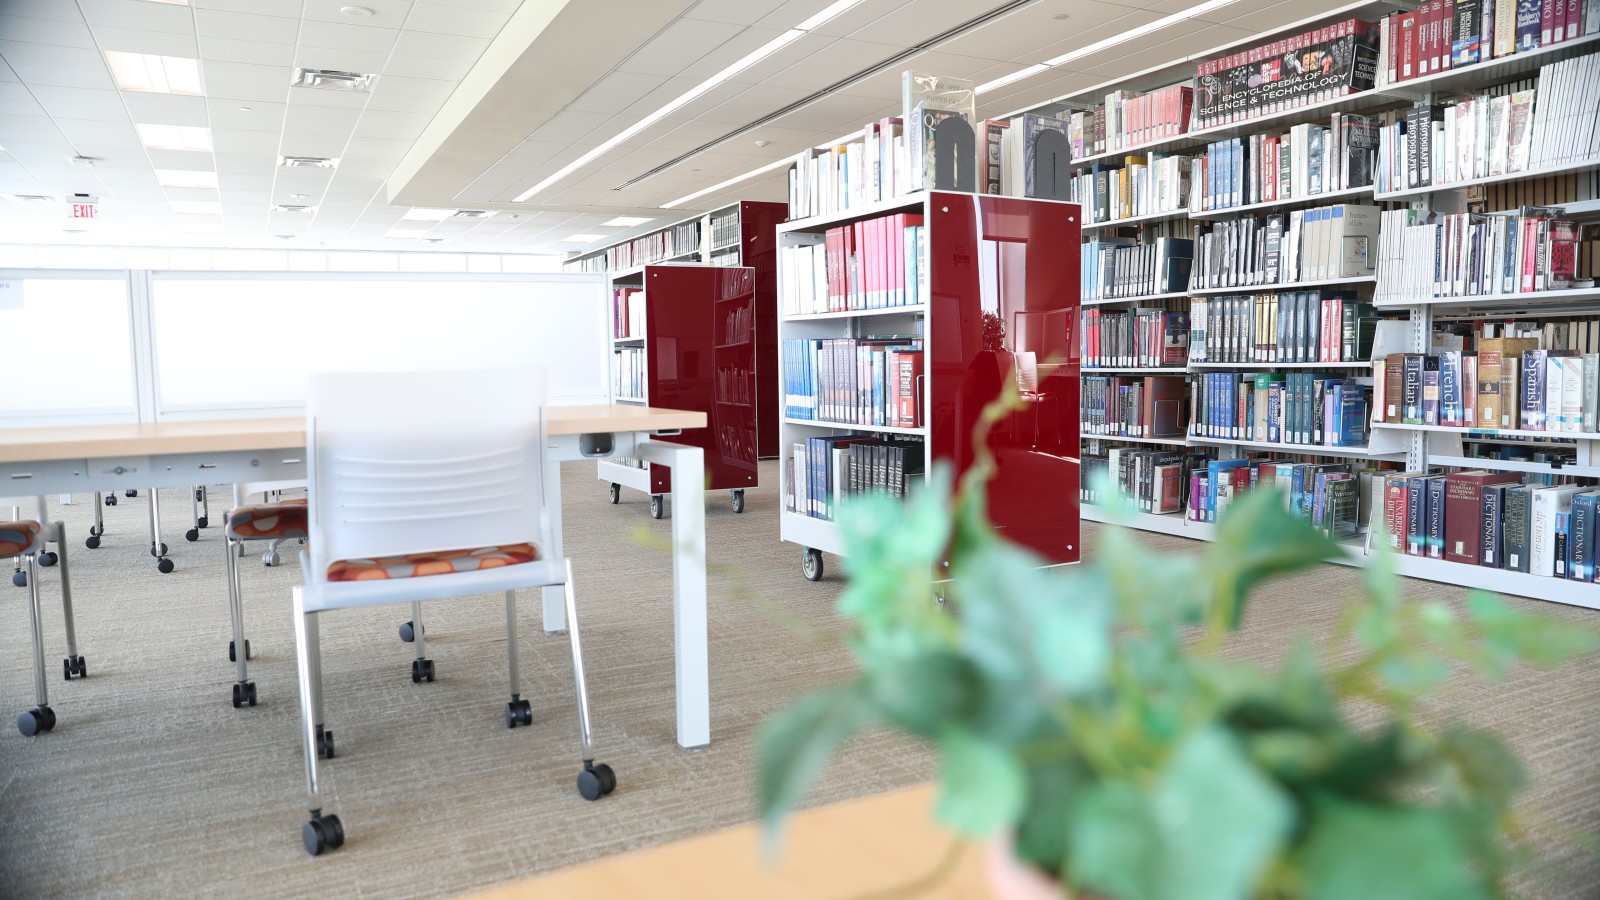 Image of bookshelves in library